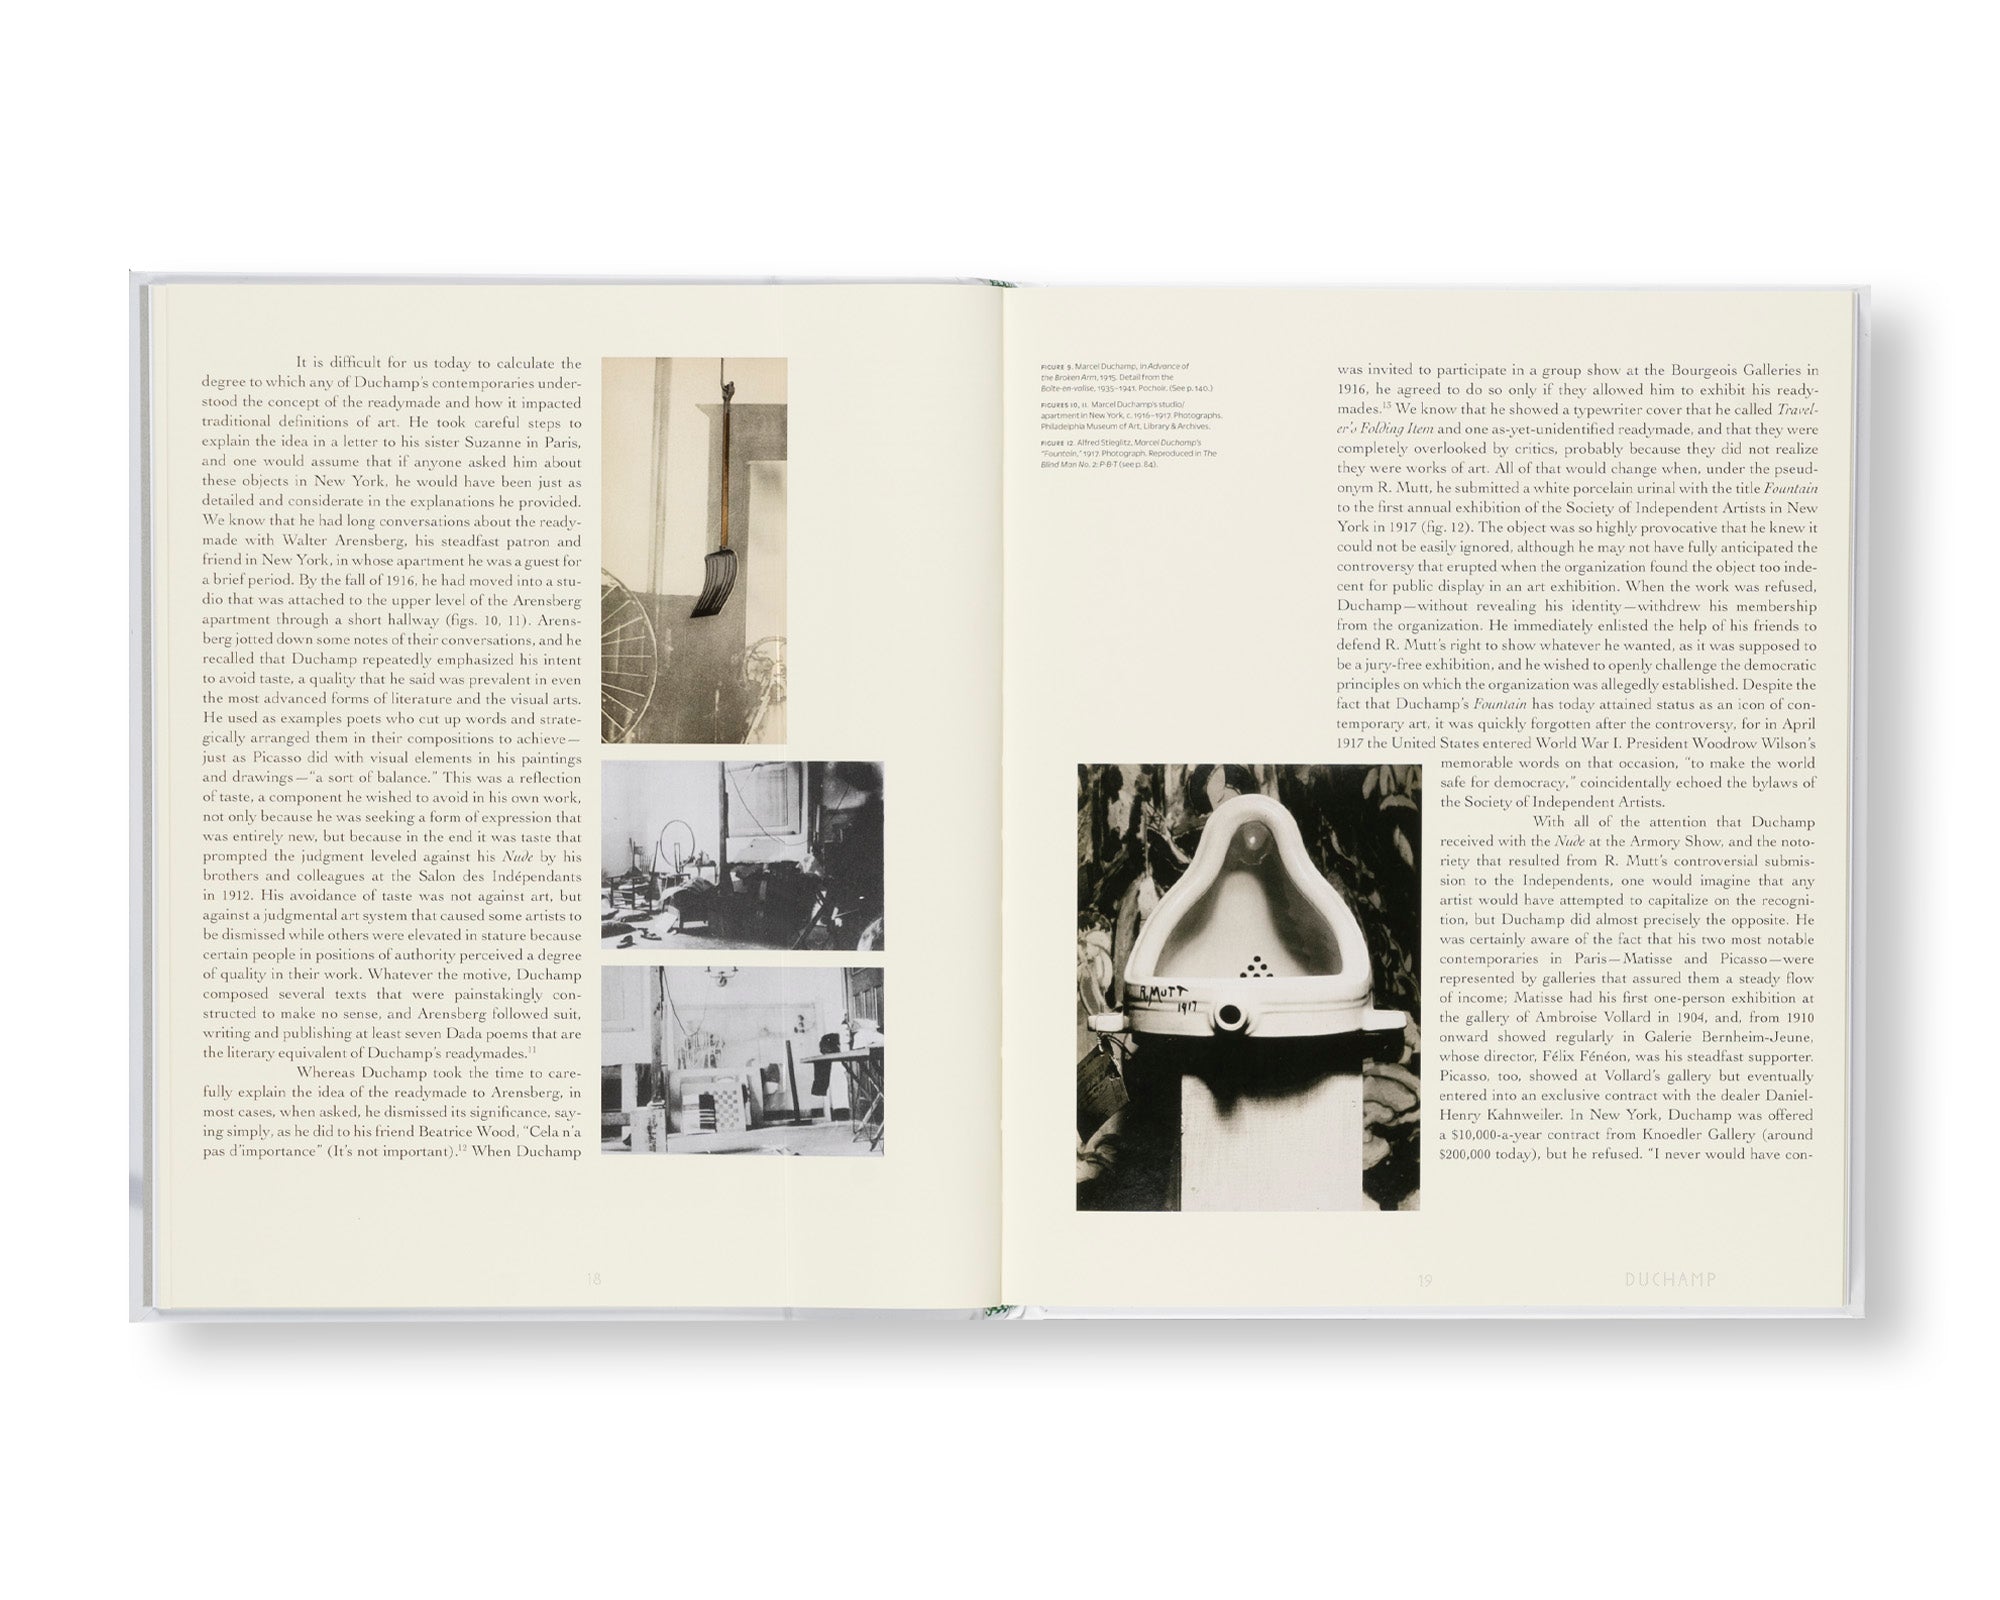 MARCEL DUCHAMP: THE BARBARA AND AARON LEVINE COLLECTION by Marcel Duchamp